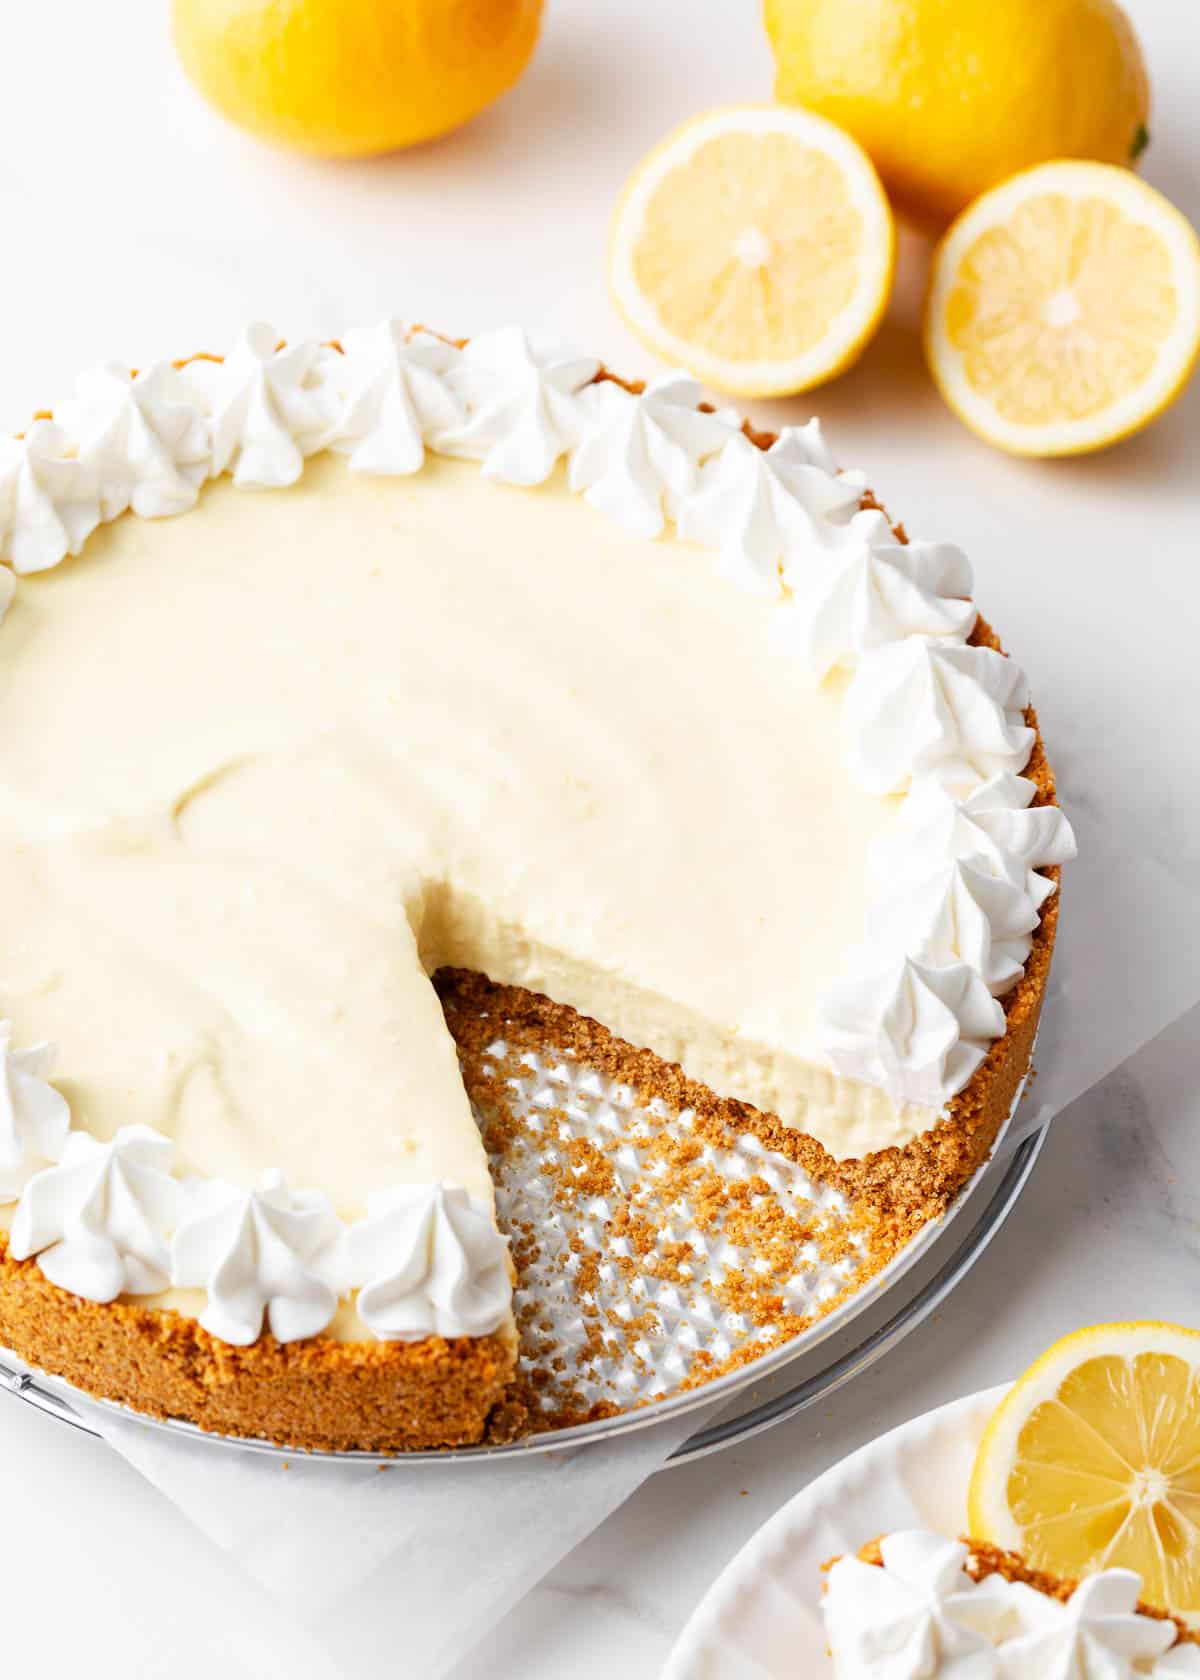 Lemon icebox pie with whipped cream on top and lemons.